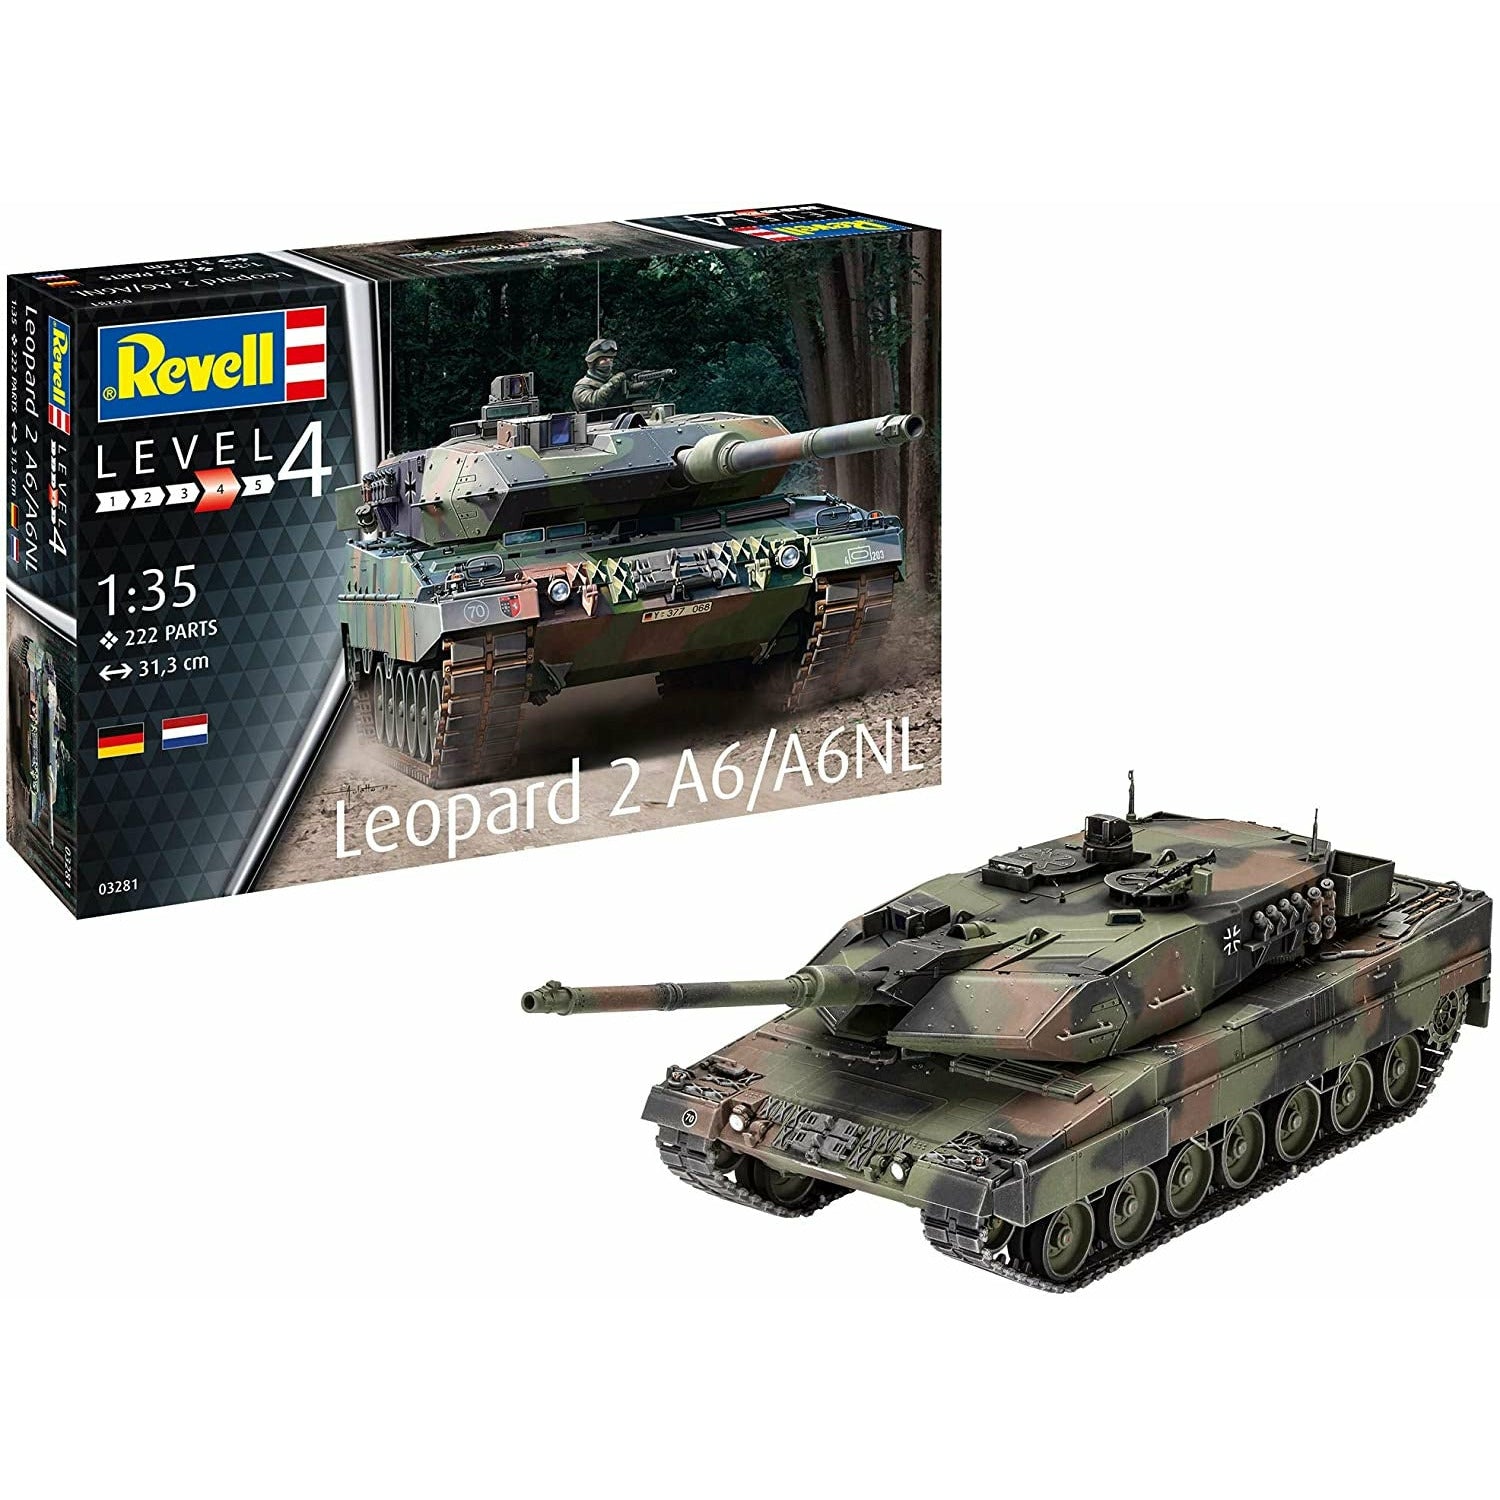 Leopard 2A6/A6NL 1/35 #03281 by Revell